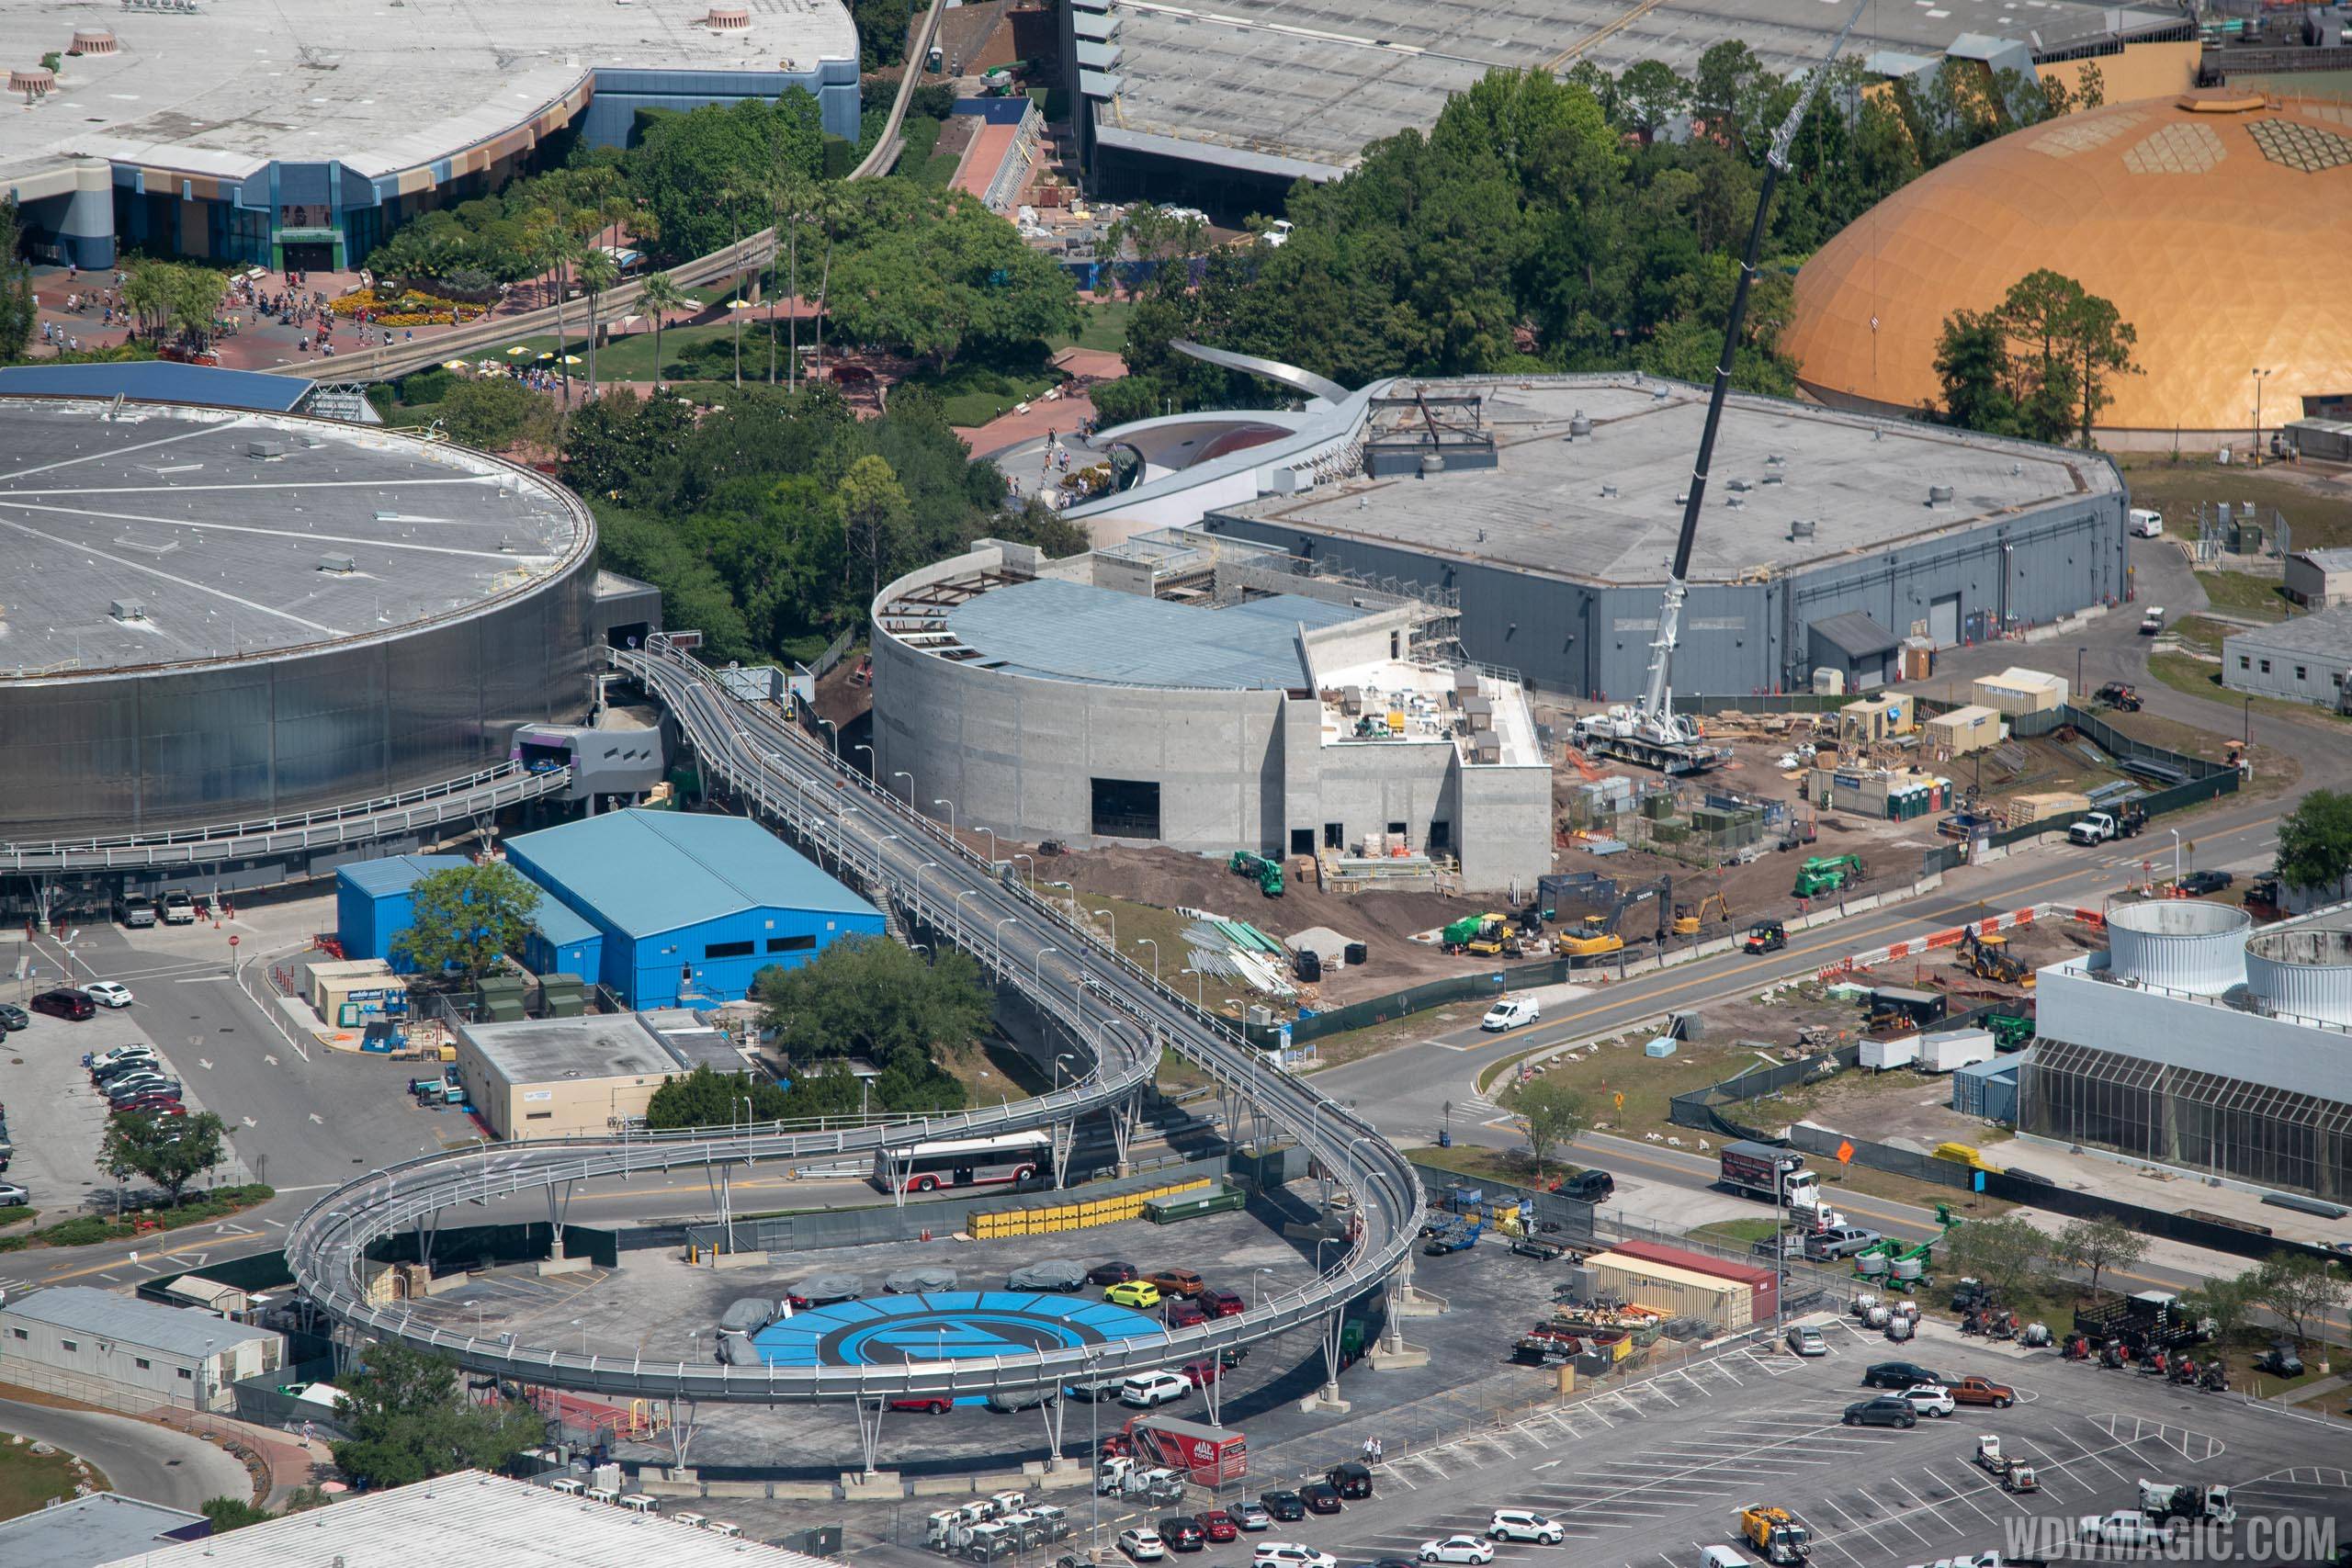 Epcot Space Restaurant construction - May 2019